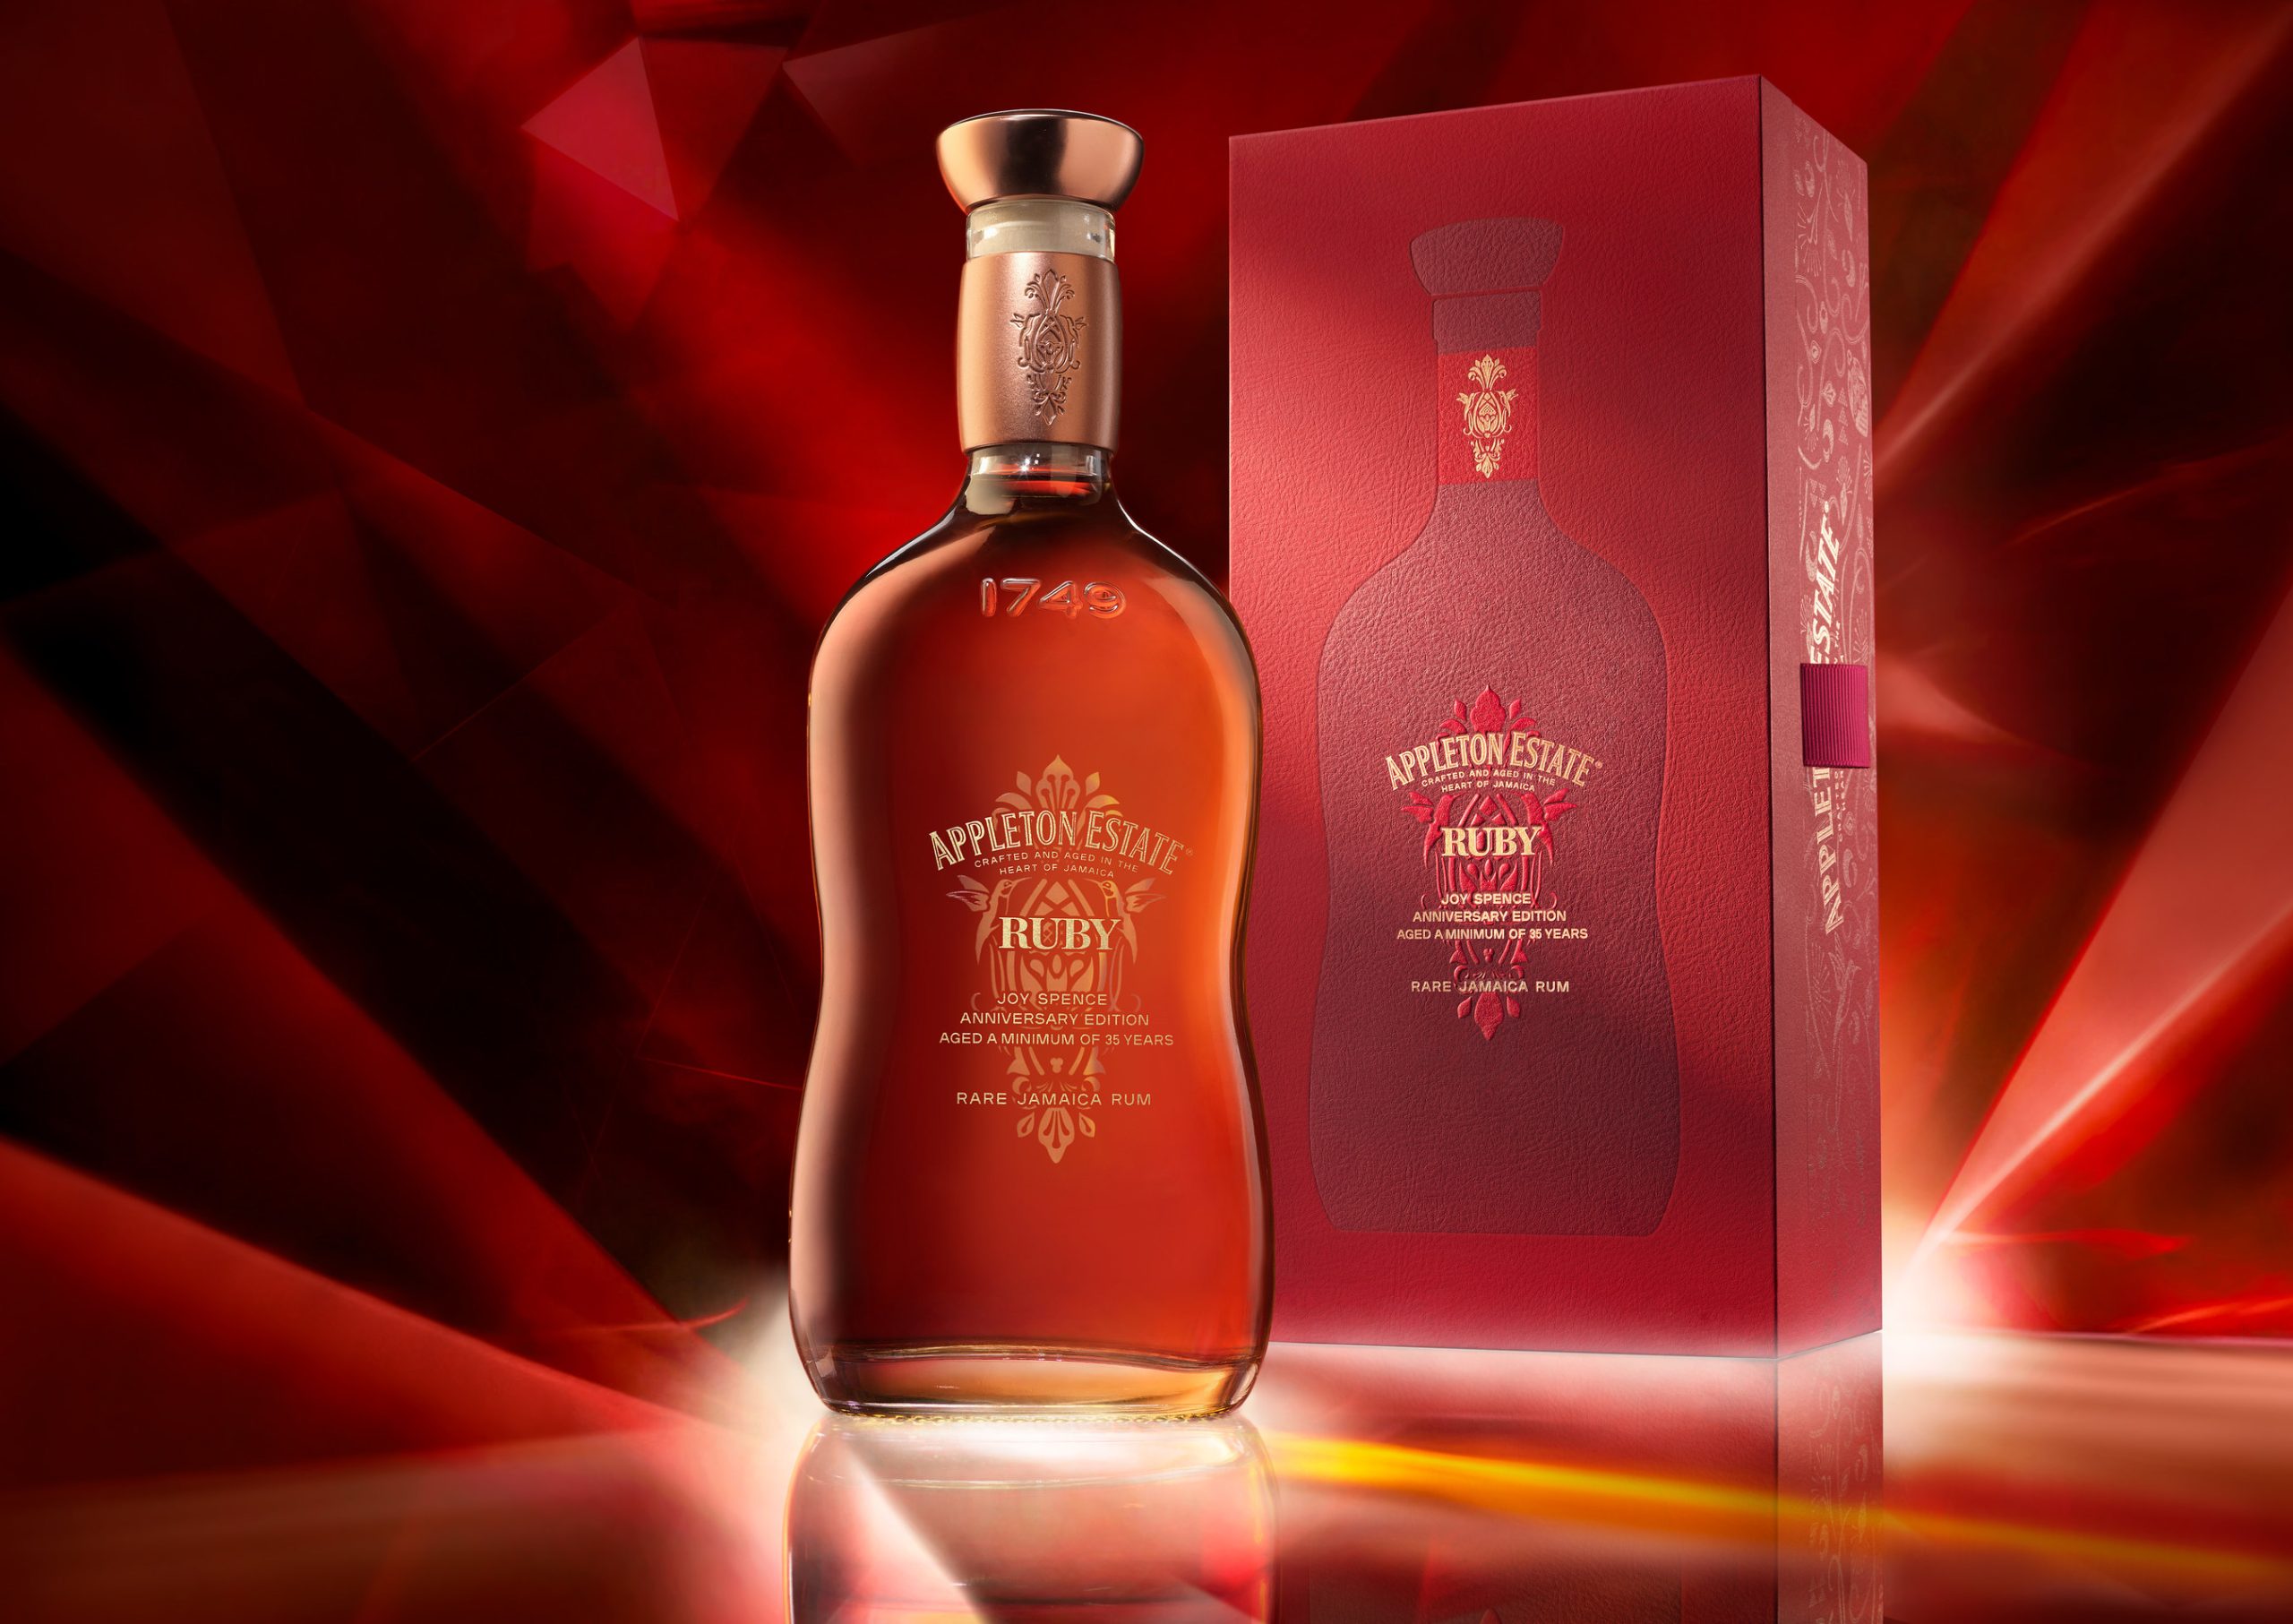 The Ruby Anniversary Edition is a limited-edition release celebrating Master Blender Joy Spence’s 40 years of craftsmanship with the distillery. (PRNewsfoto/Appleton Estate)